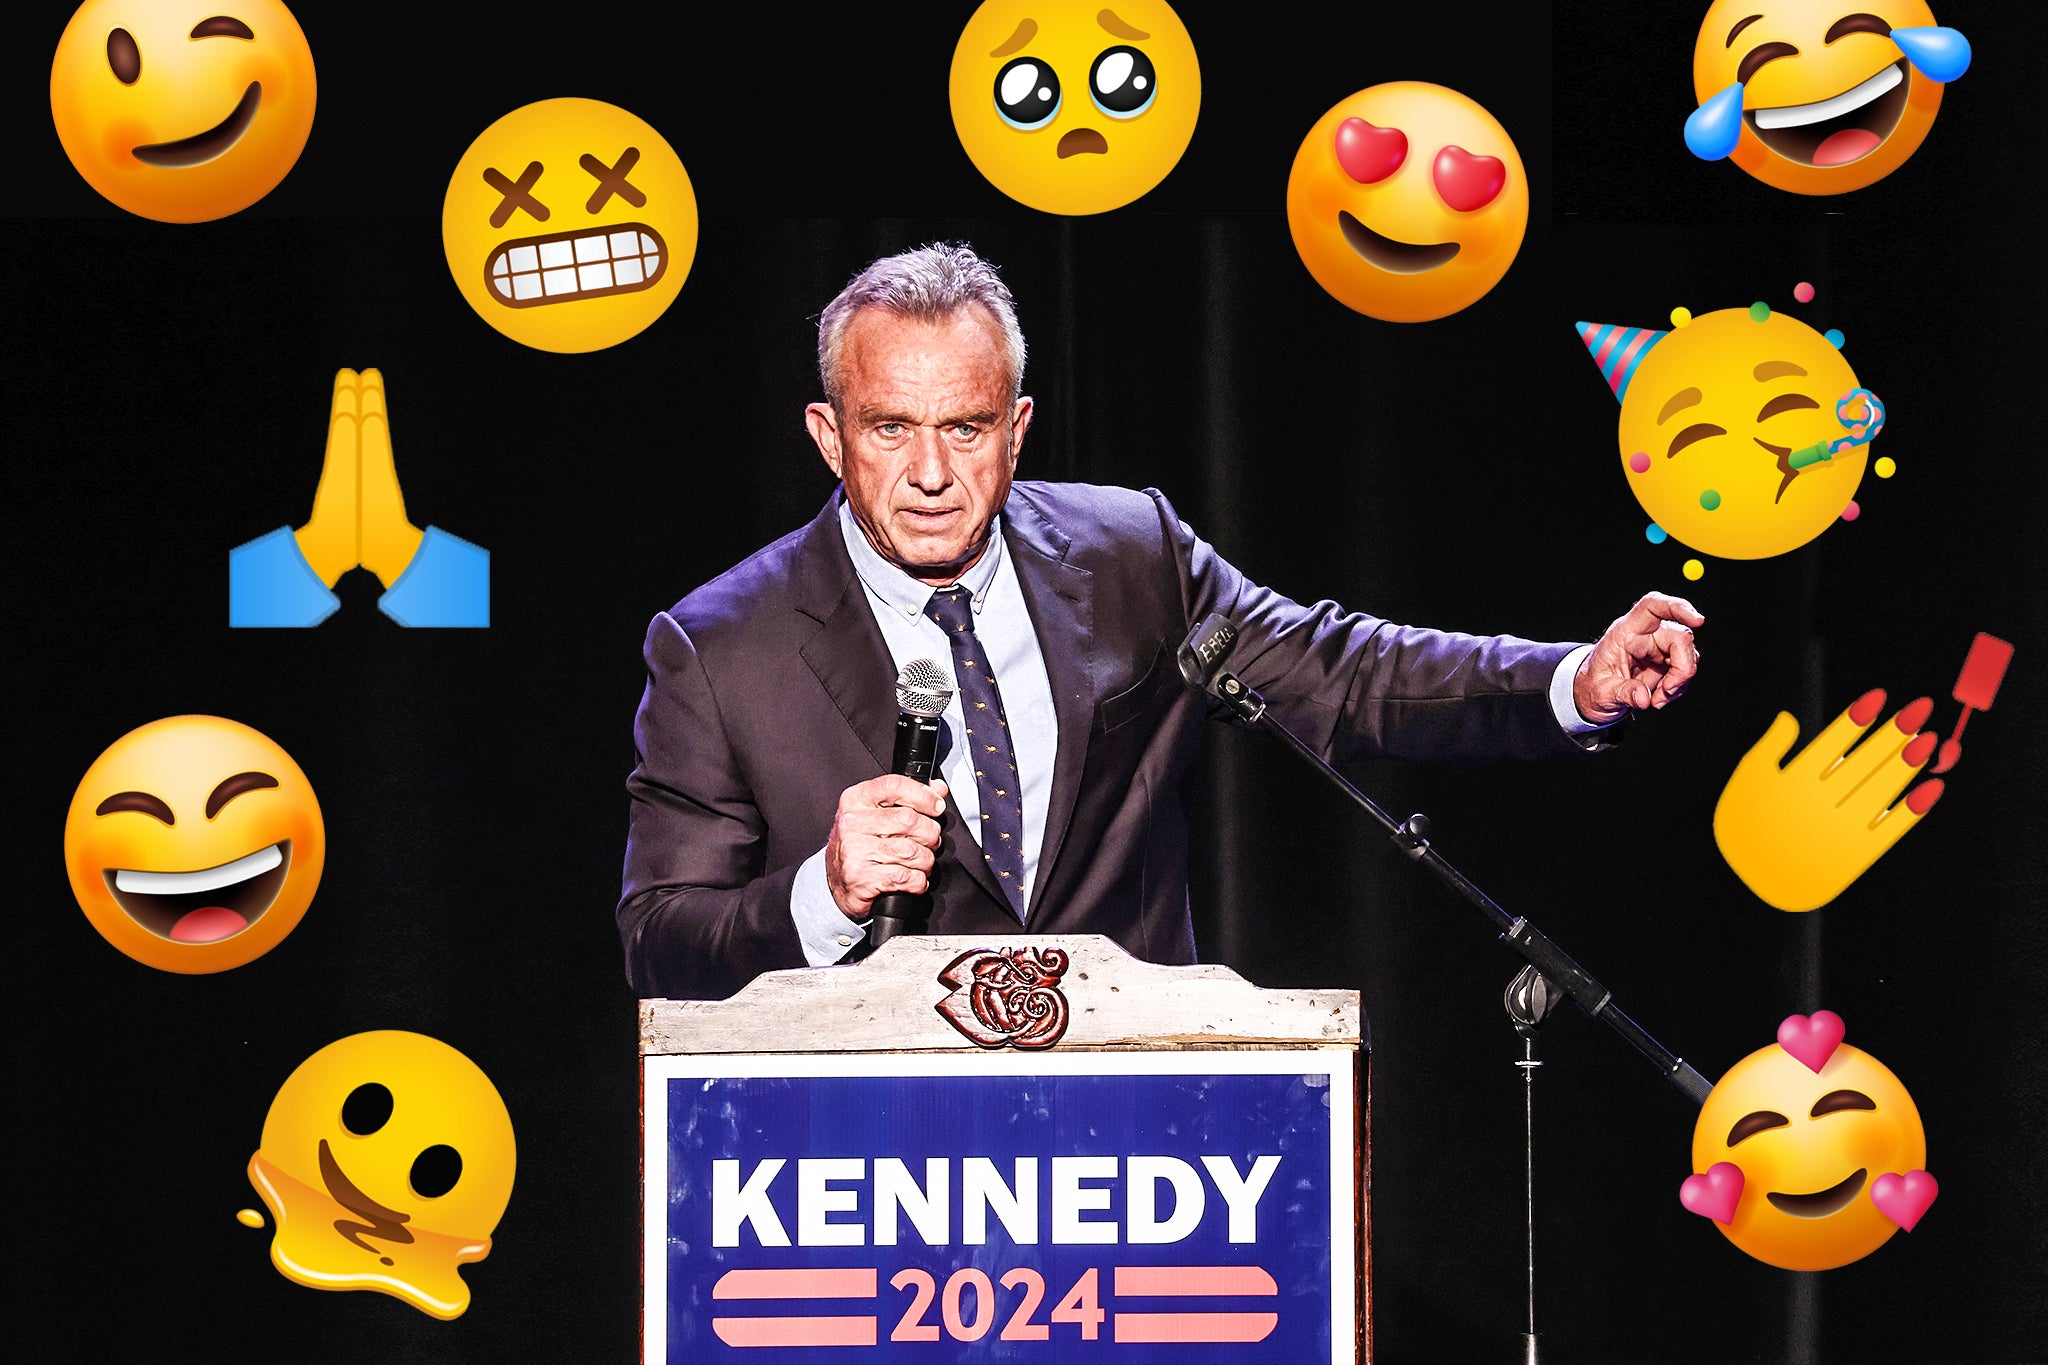 Robert F Kennedy Jr is actively courting the Gen Z vote after several encouraging polls.